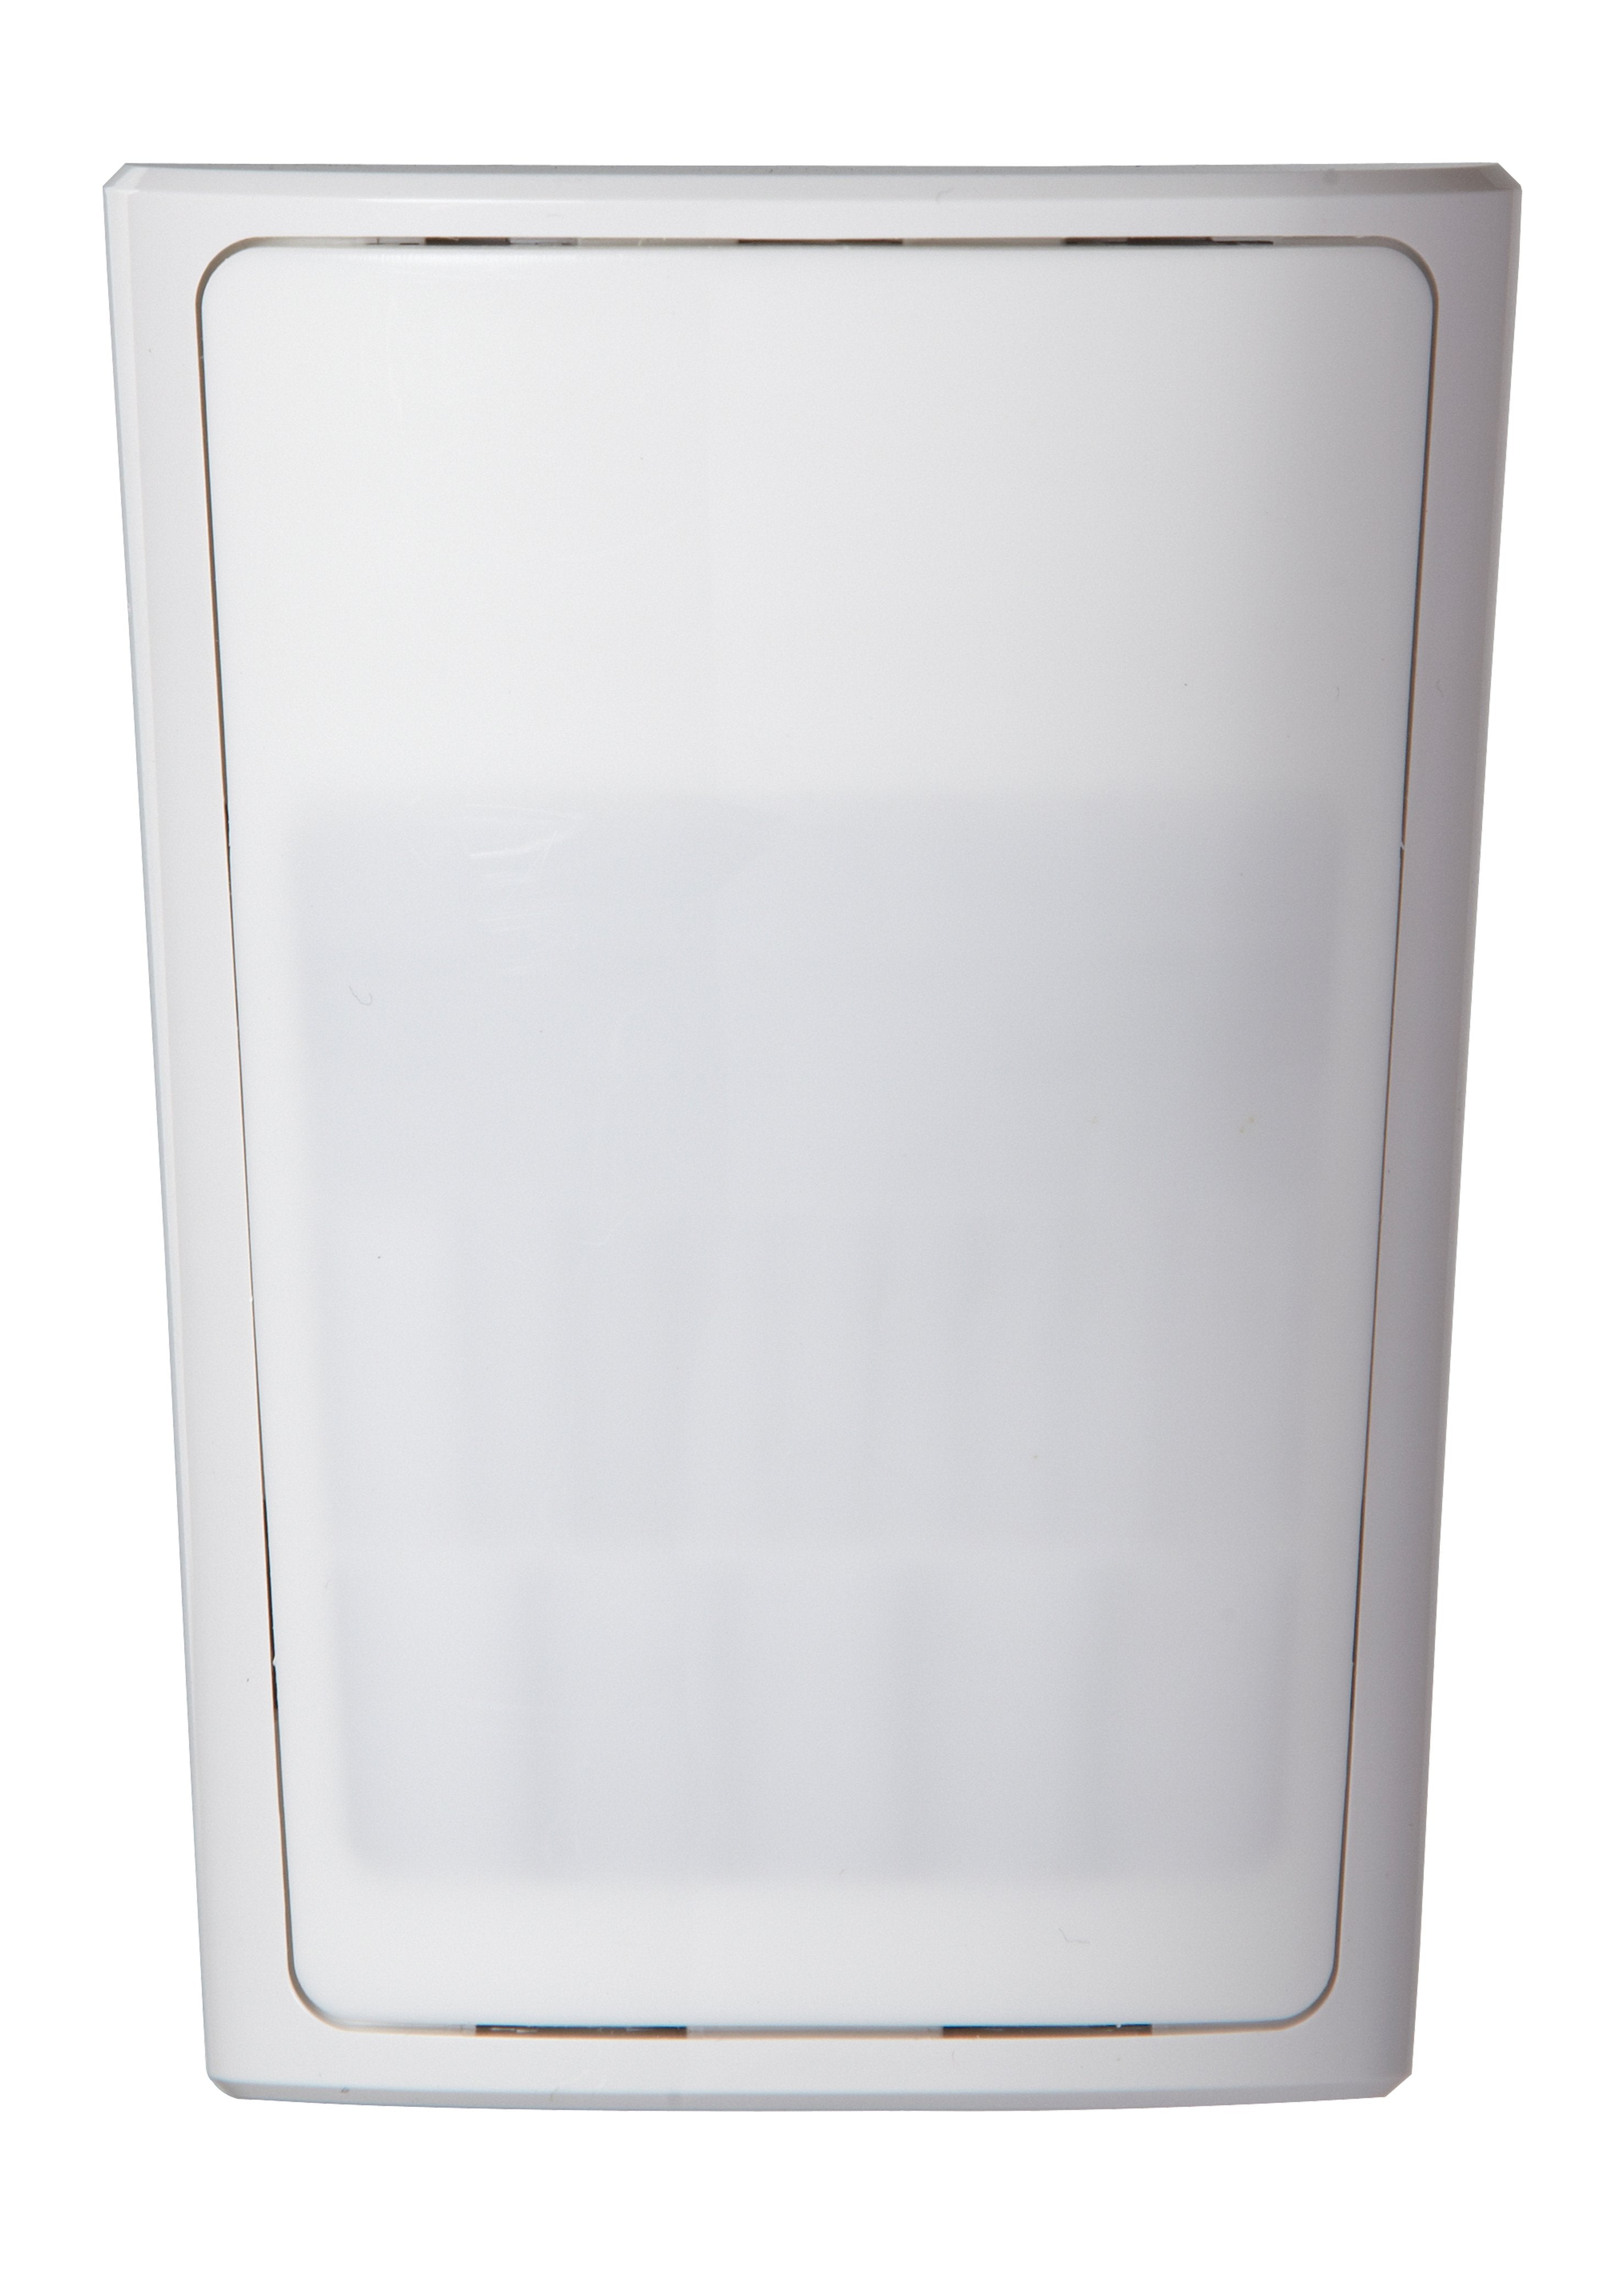 DSC Power-G Wireless PIR Motion Detector with PET Immunity (up to 38KGS) and Range 12x12M @2.1M Height